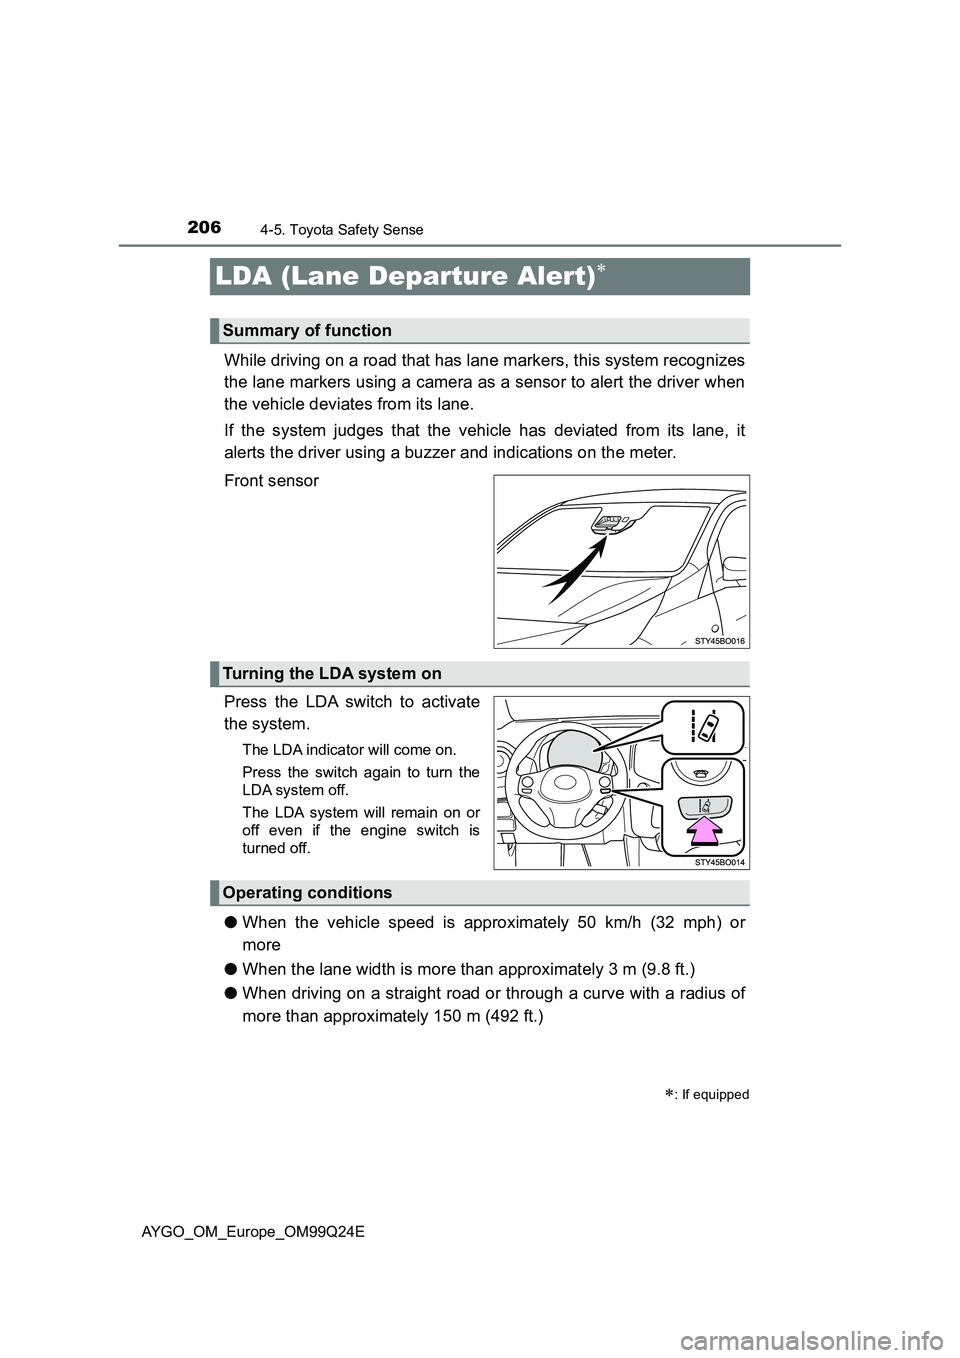 TOYOTA AYGO 2017  Owners Manual (in English) 2064-5. Toyota Safety Sense
AYGO_OM_Europe_OM99Q24E
LDA (Lane Departure Alert)
While driving on a road that has lane markers, this system recognizes 
the lane markers using a camera as a sensor to 